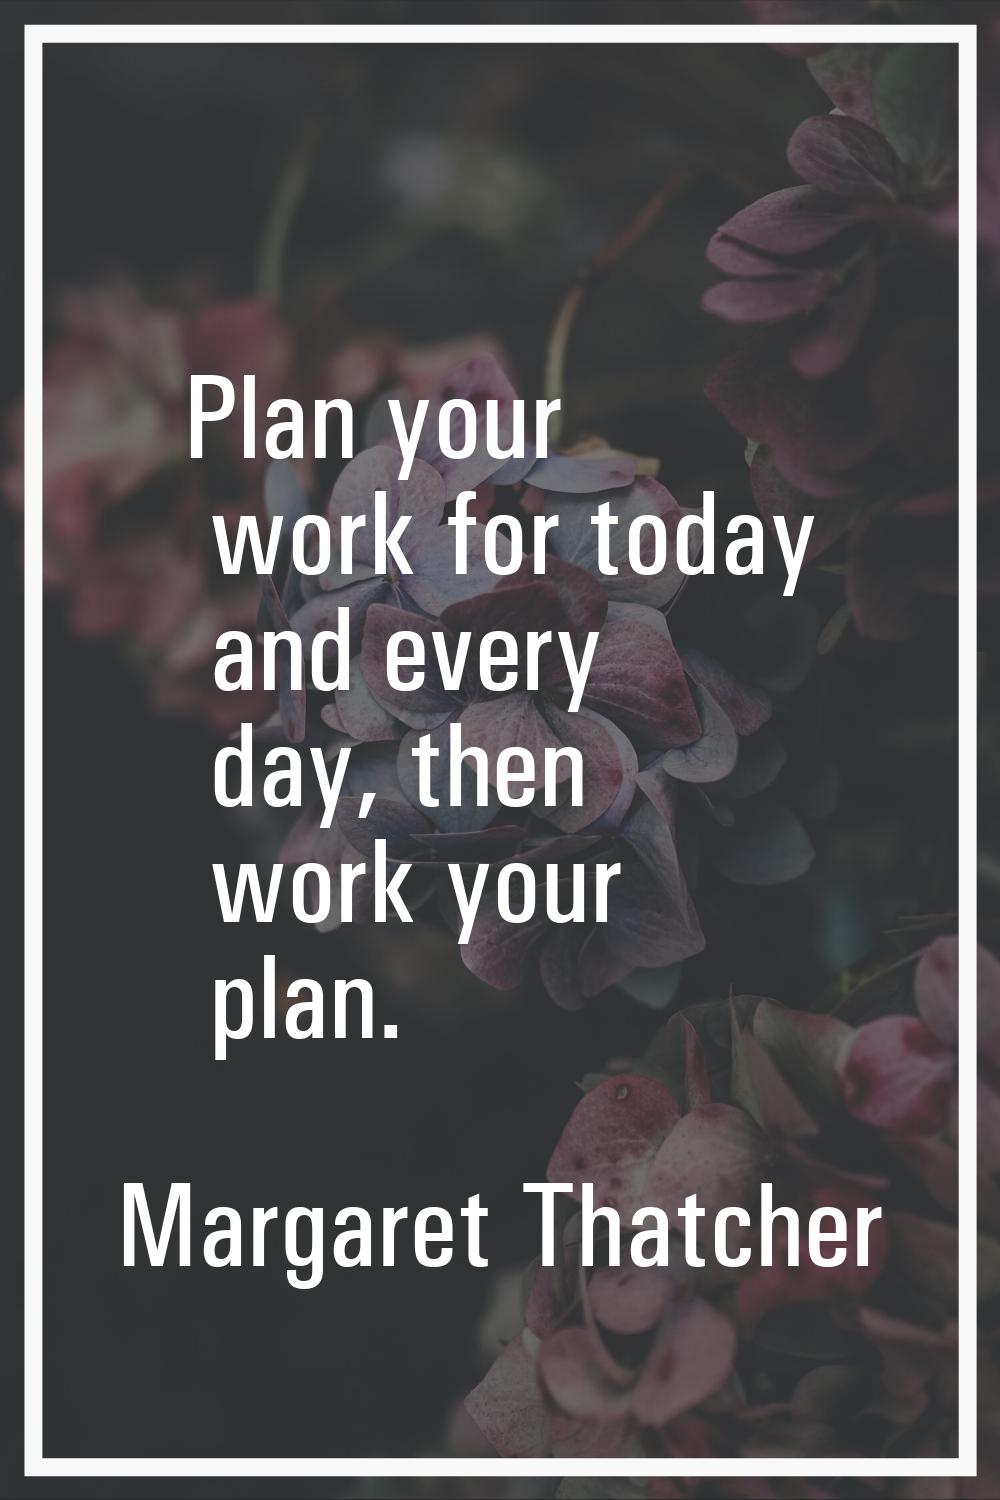 Plan your work for today and every day, then work your plan.